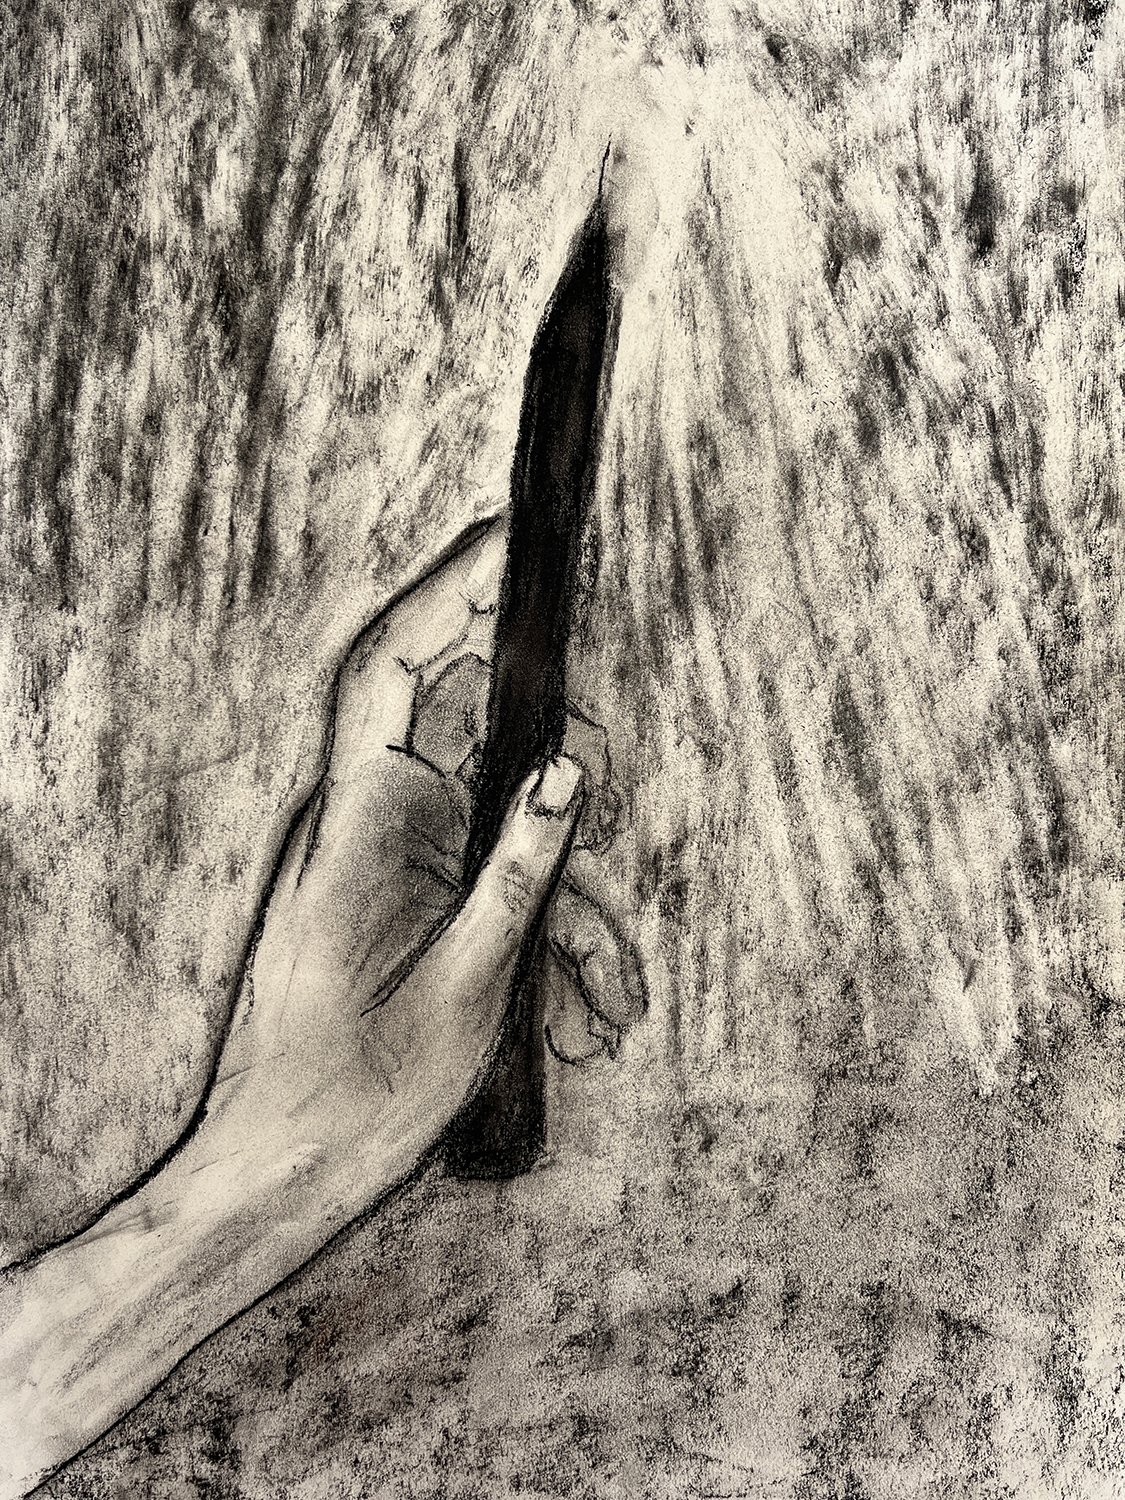 One / 2022, charcoal on paper, 30 x 40 cm